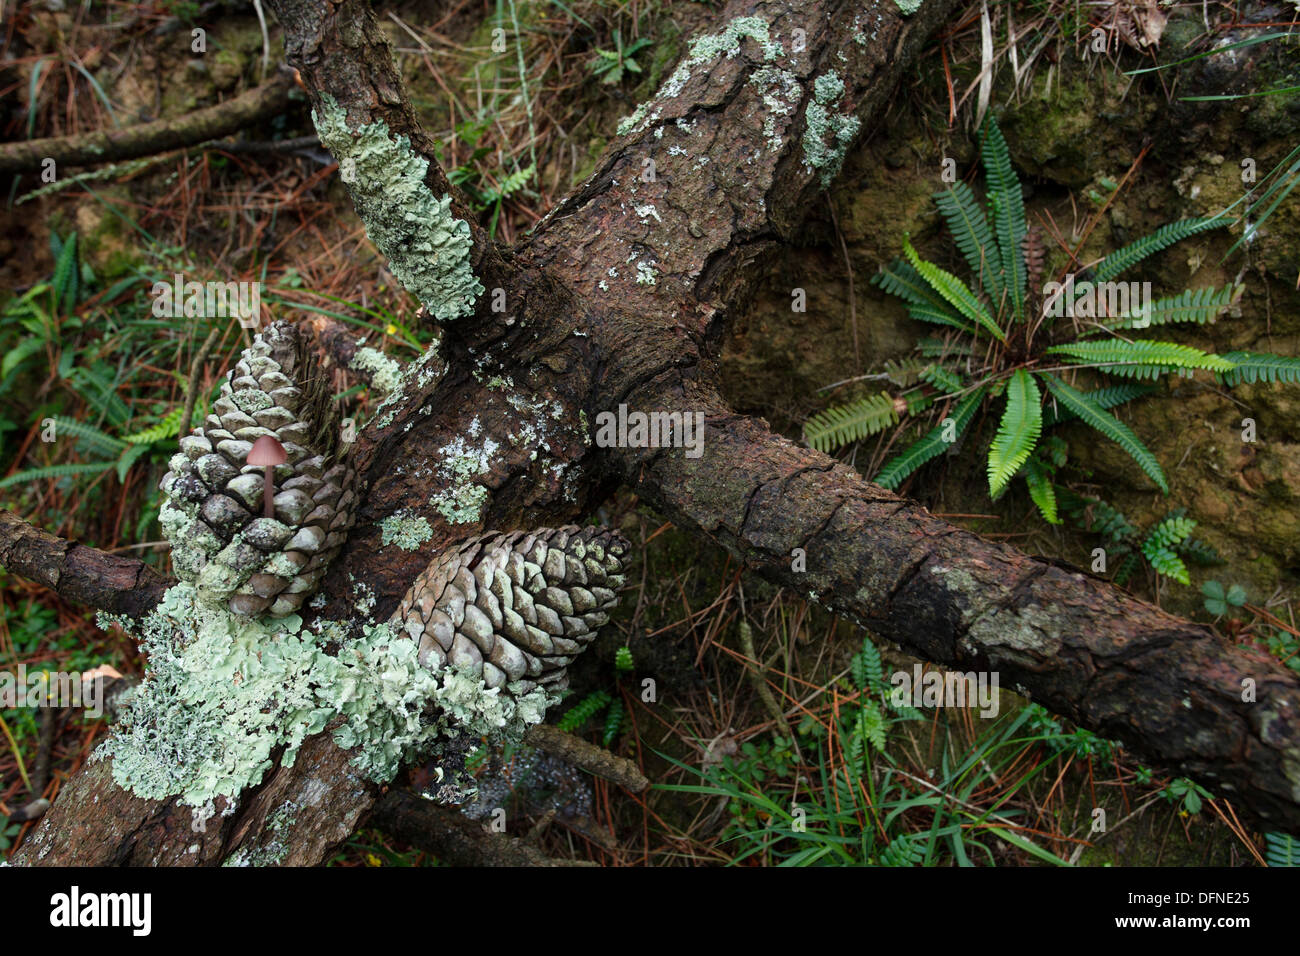 Branch with pine cones on the forest soil, El bosque animado de Oma, Kortezubi, Guernica, natural reserve of Urdaibai, province Stock Photo